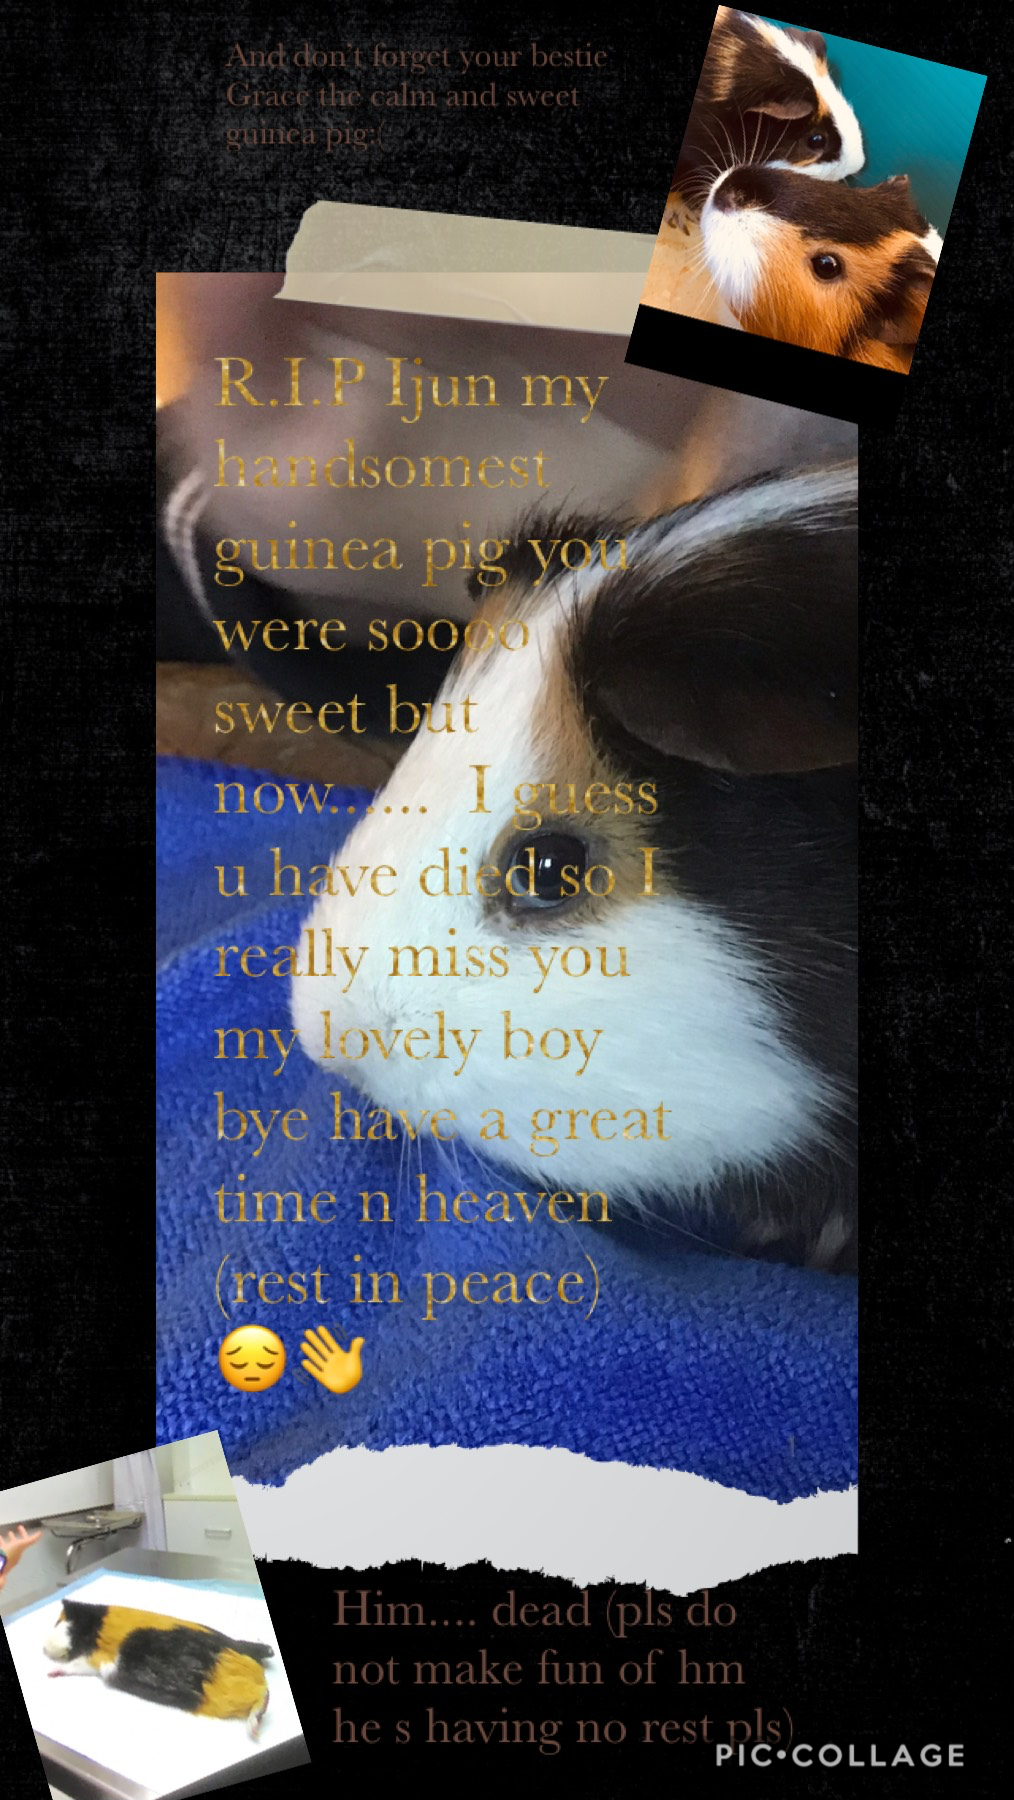 The people who reads this pls be mindful and keep a secret, and last but not least is they pls do not make fun of the guinea pig having rest.😔😥😣